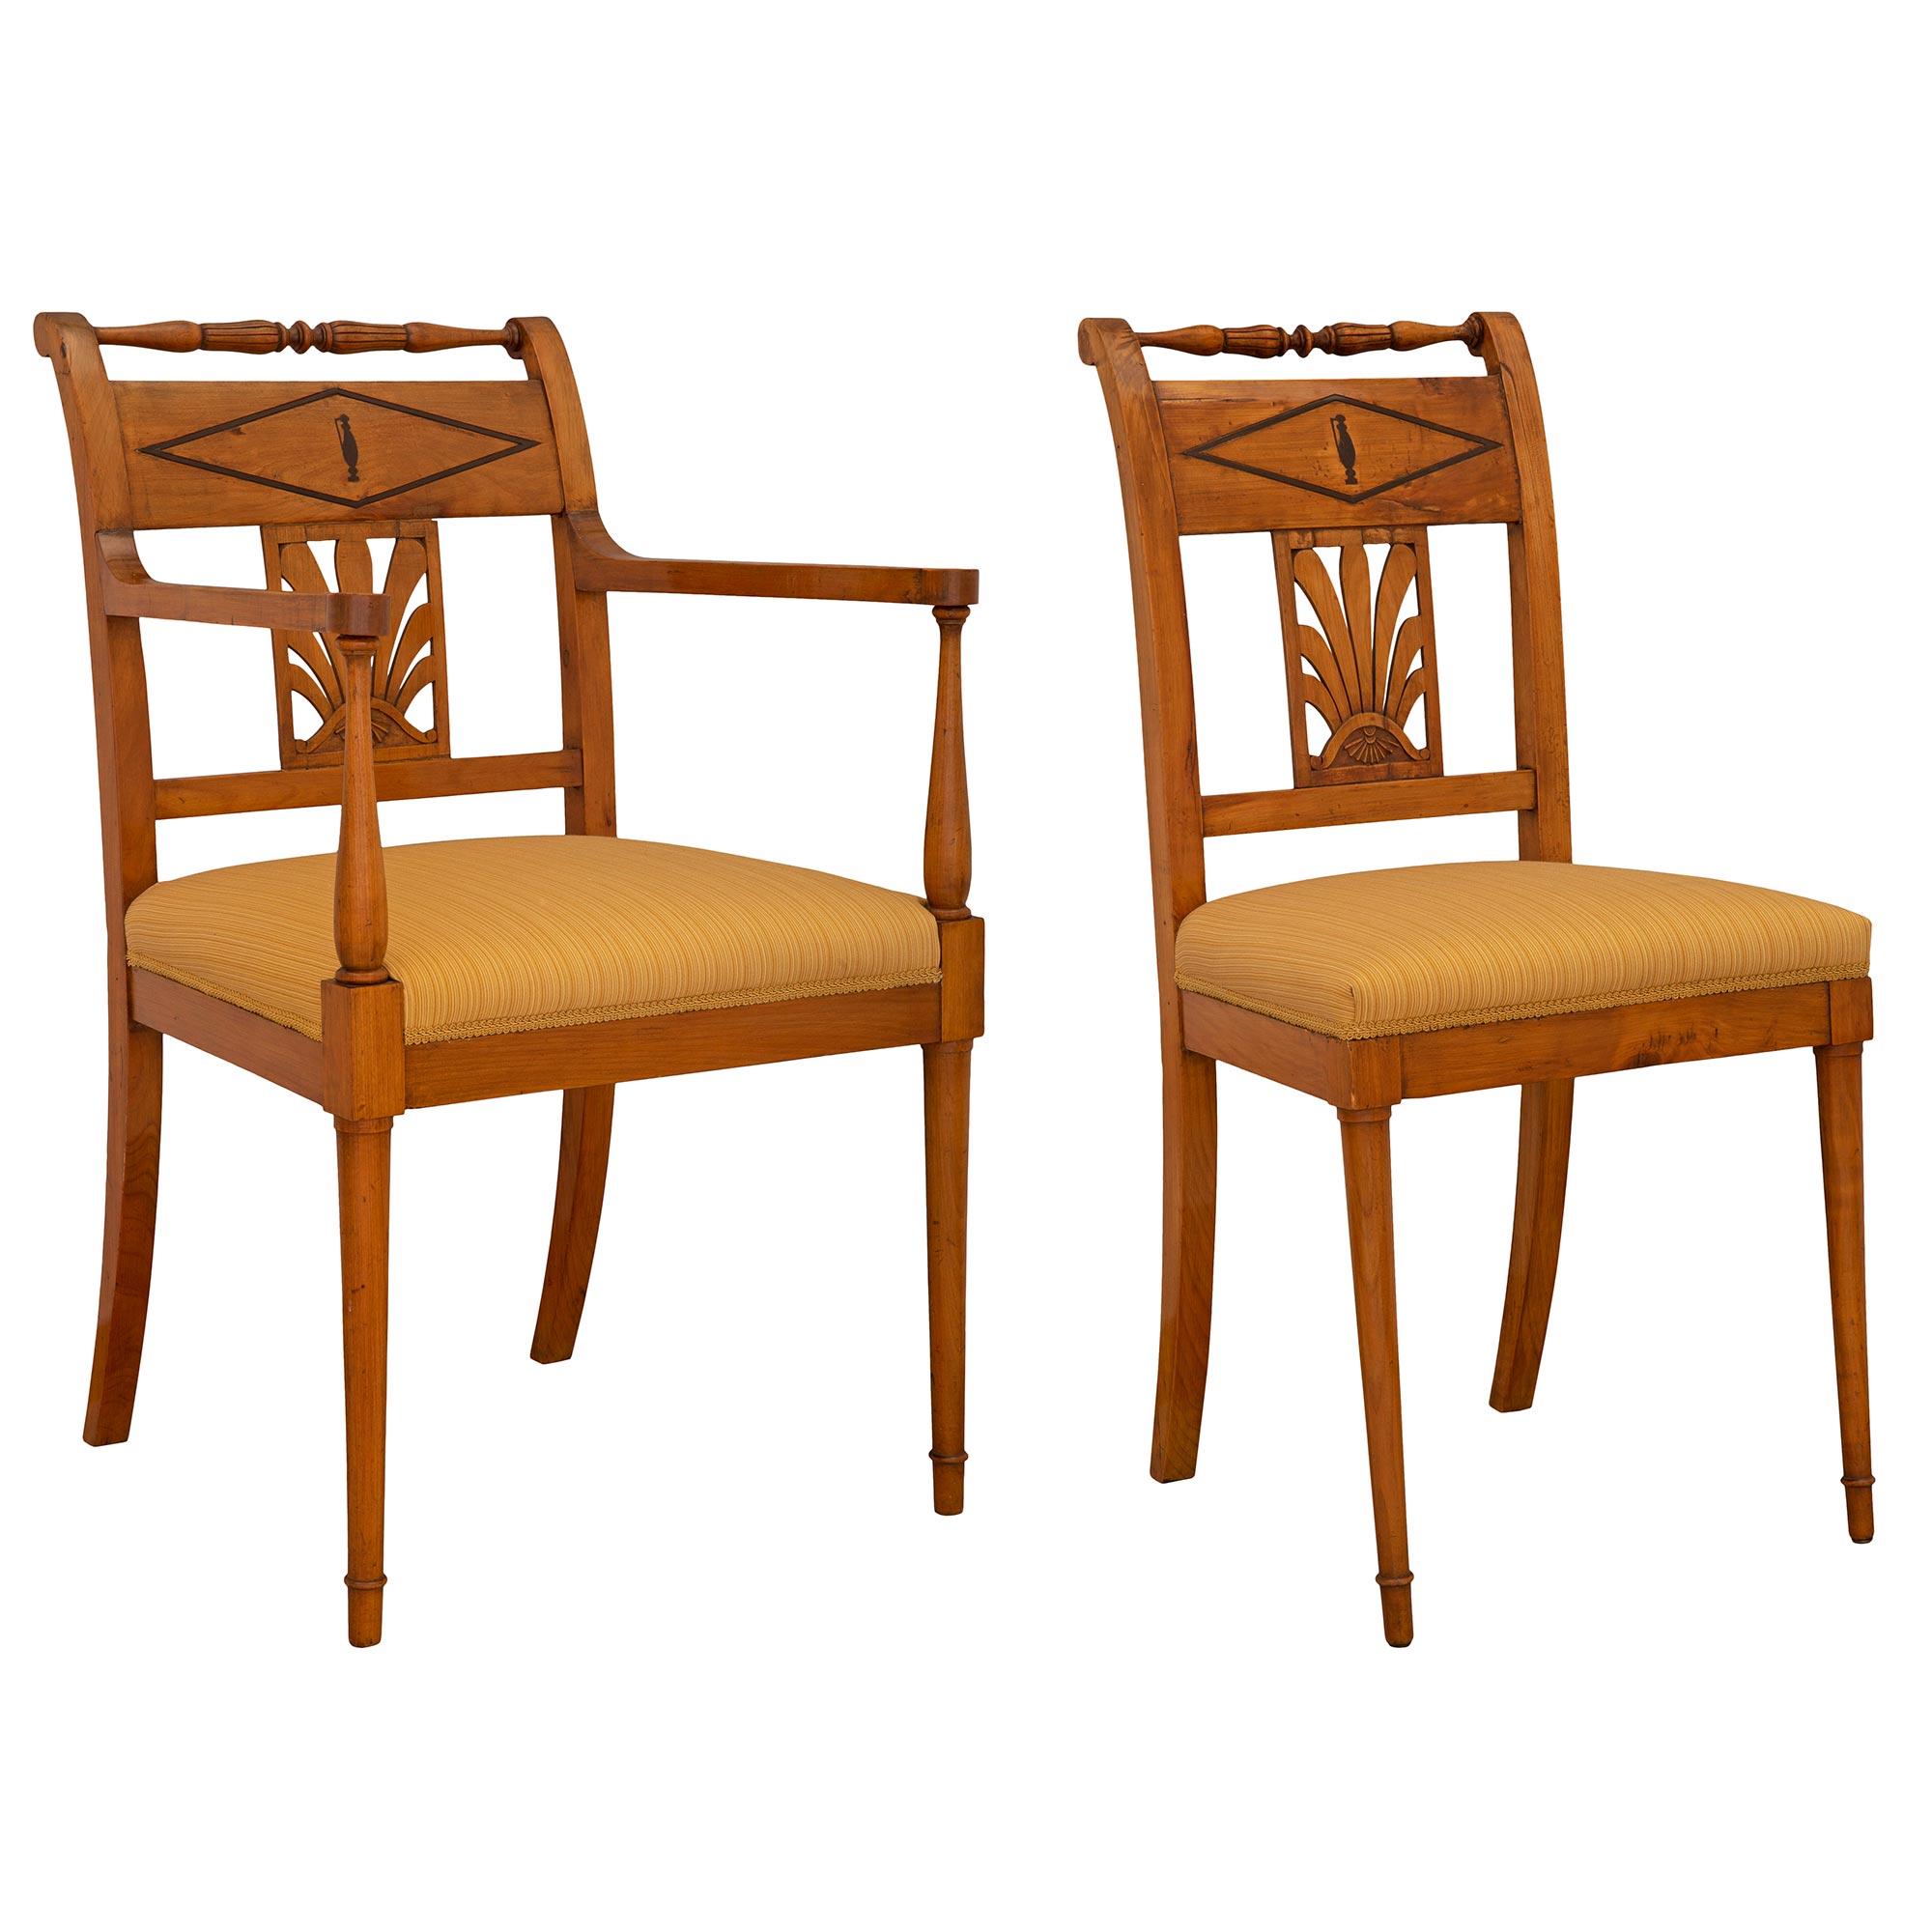 Unknown Set of Mid-19th Century Biedermeier Dining Room Chairs For Sale